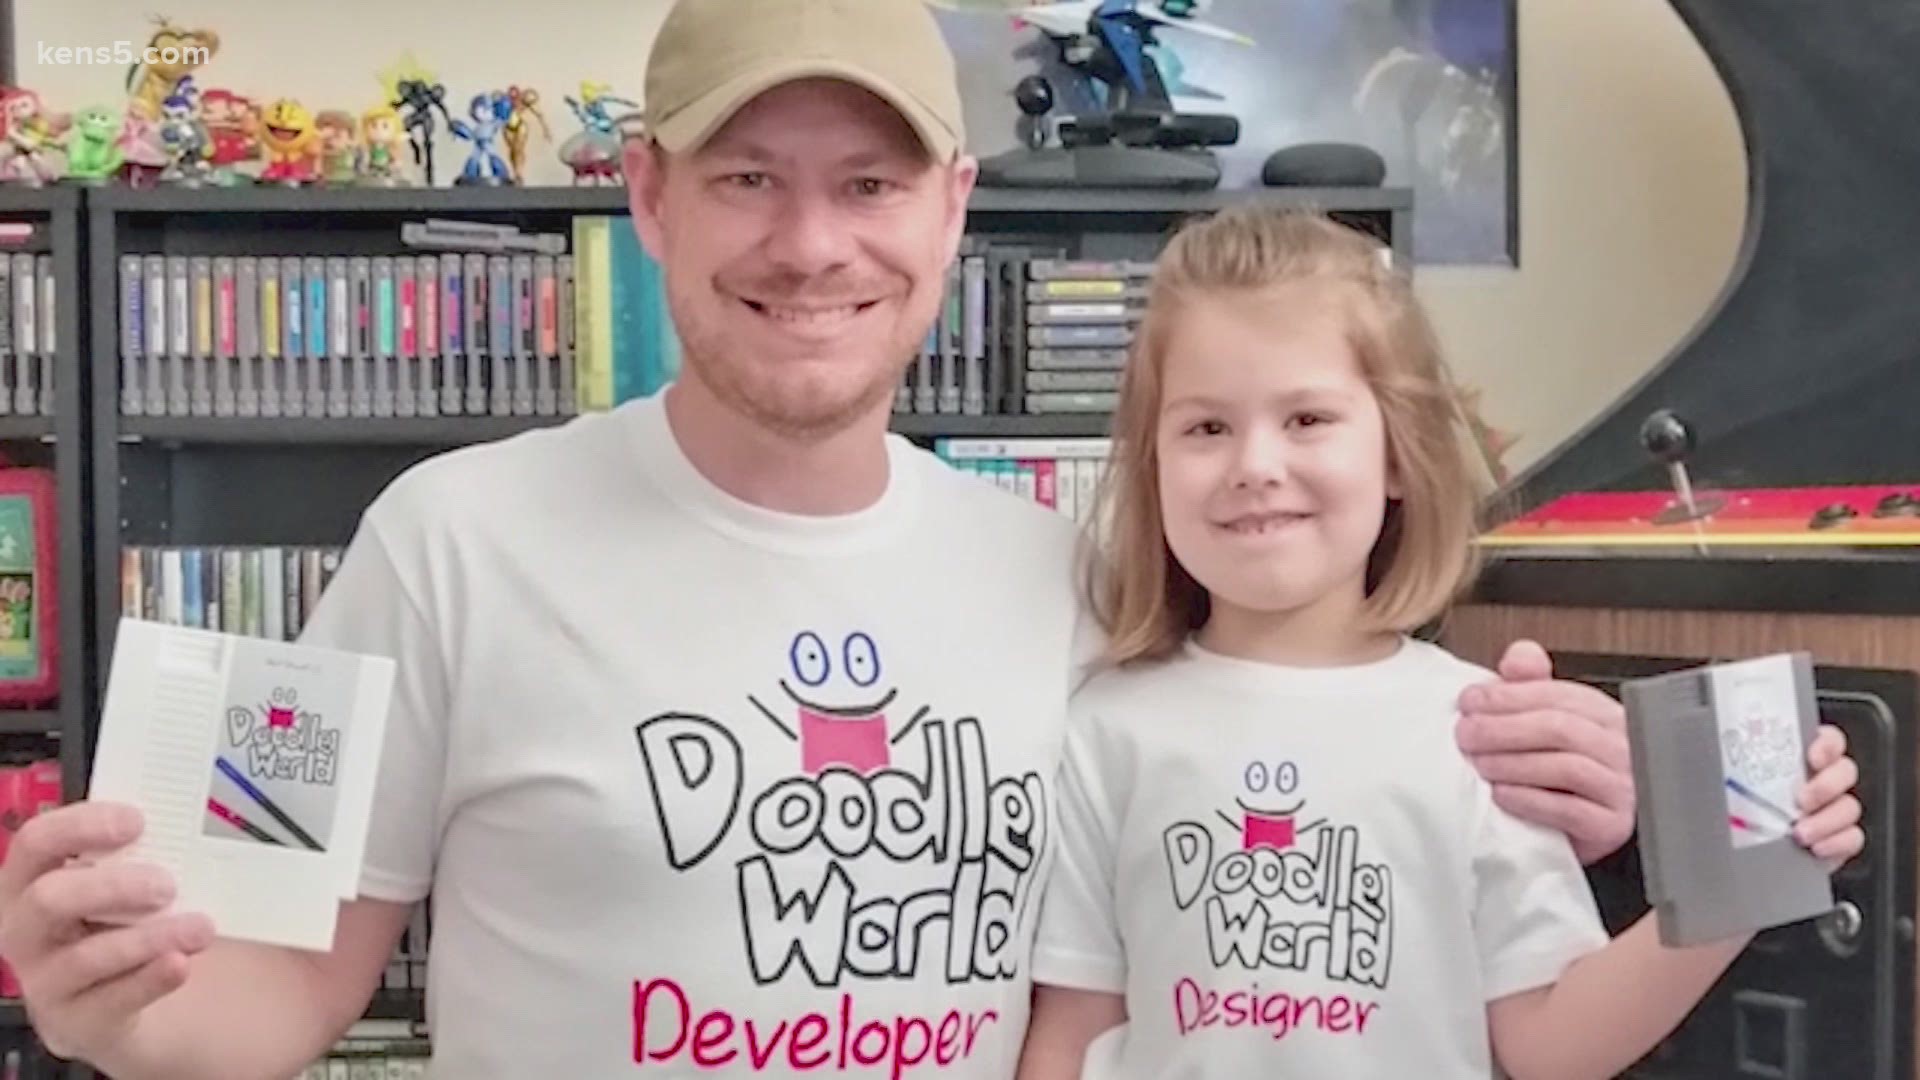 The Air Force vet and his 6-year-old daughter have created a videogame that caught the attention of the megapopular company.